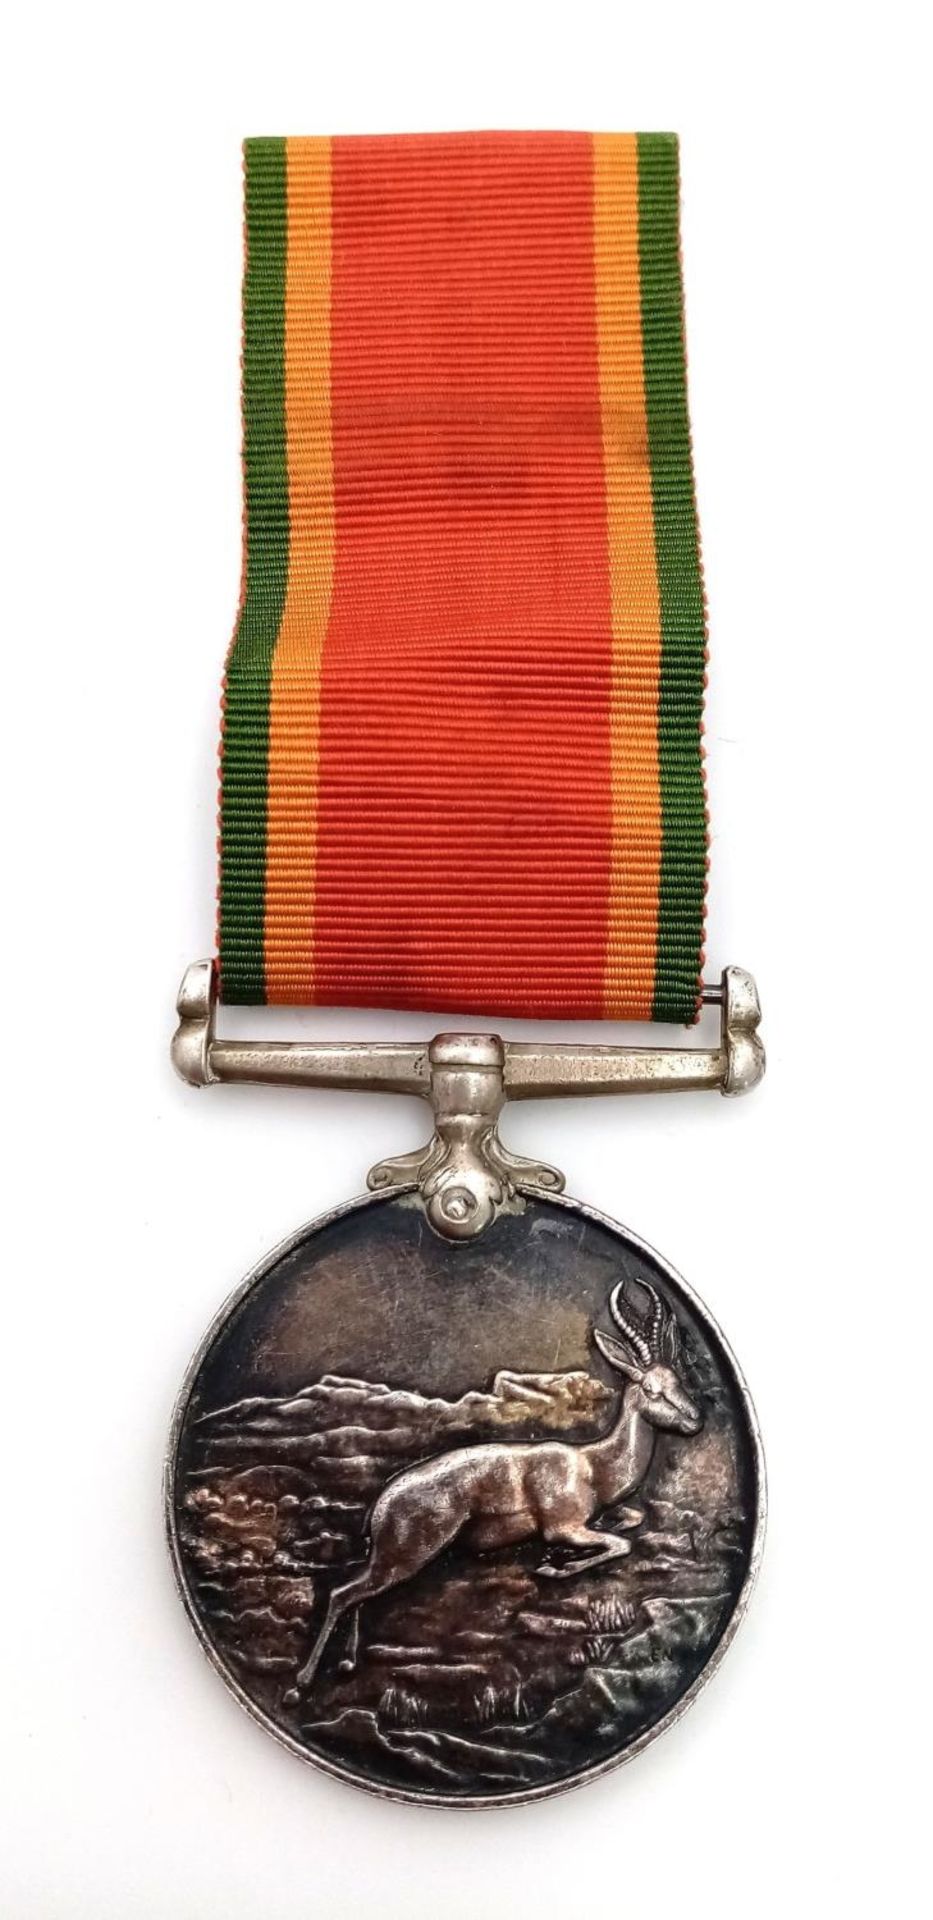 An African Service Medal with Ribbon - Awarded to J.W. Minogue.